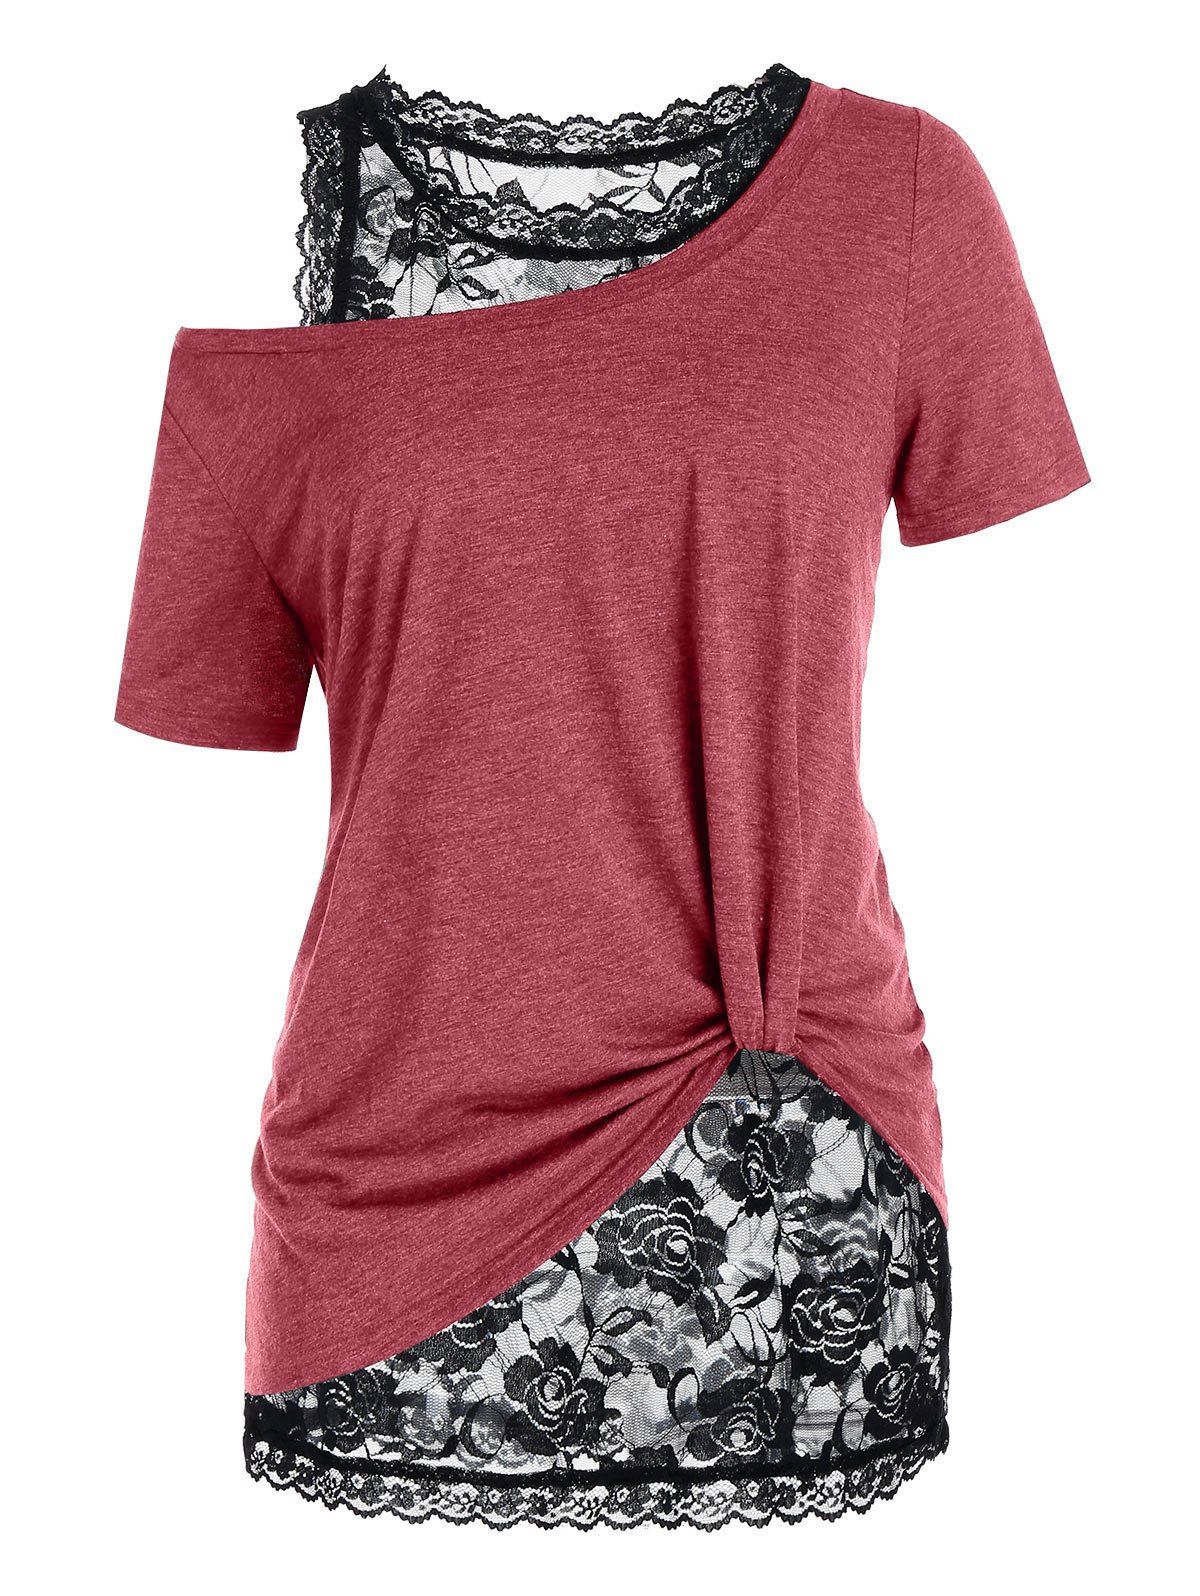 Plus Size Top Heather Skew Collar T-shirt and Scalloped Sheer Rose Lace Tank Top Set - DEEP RED 2X